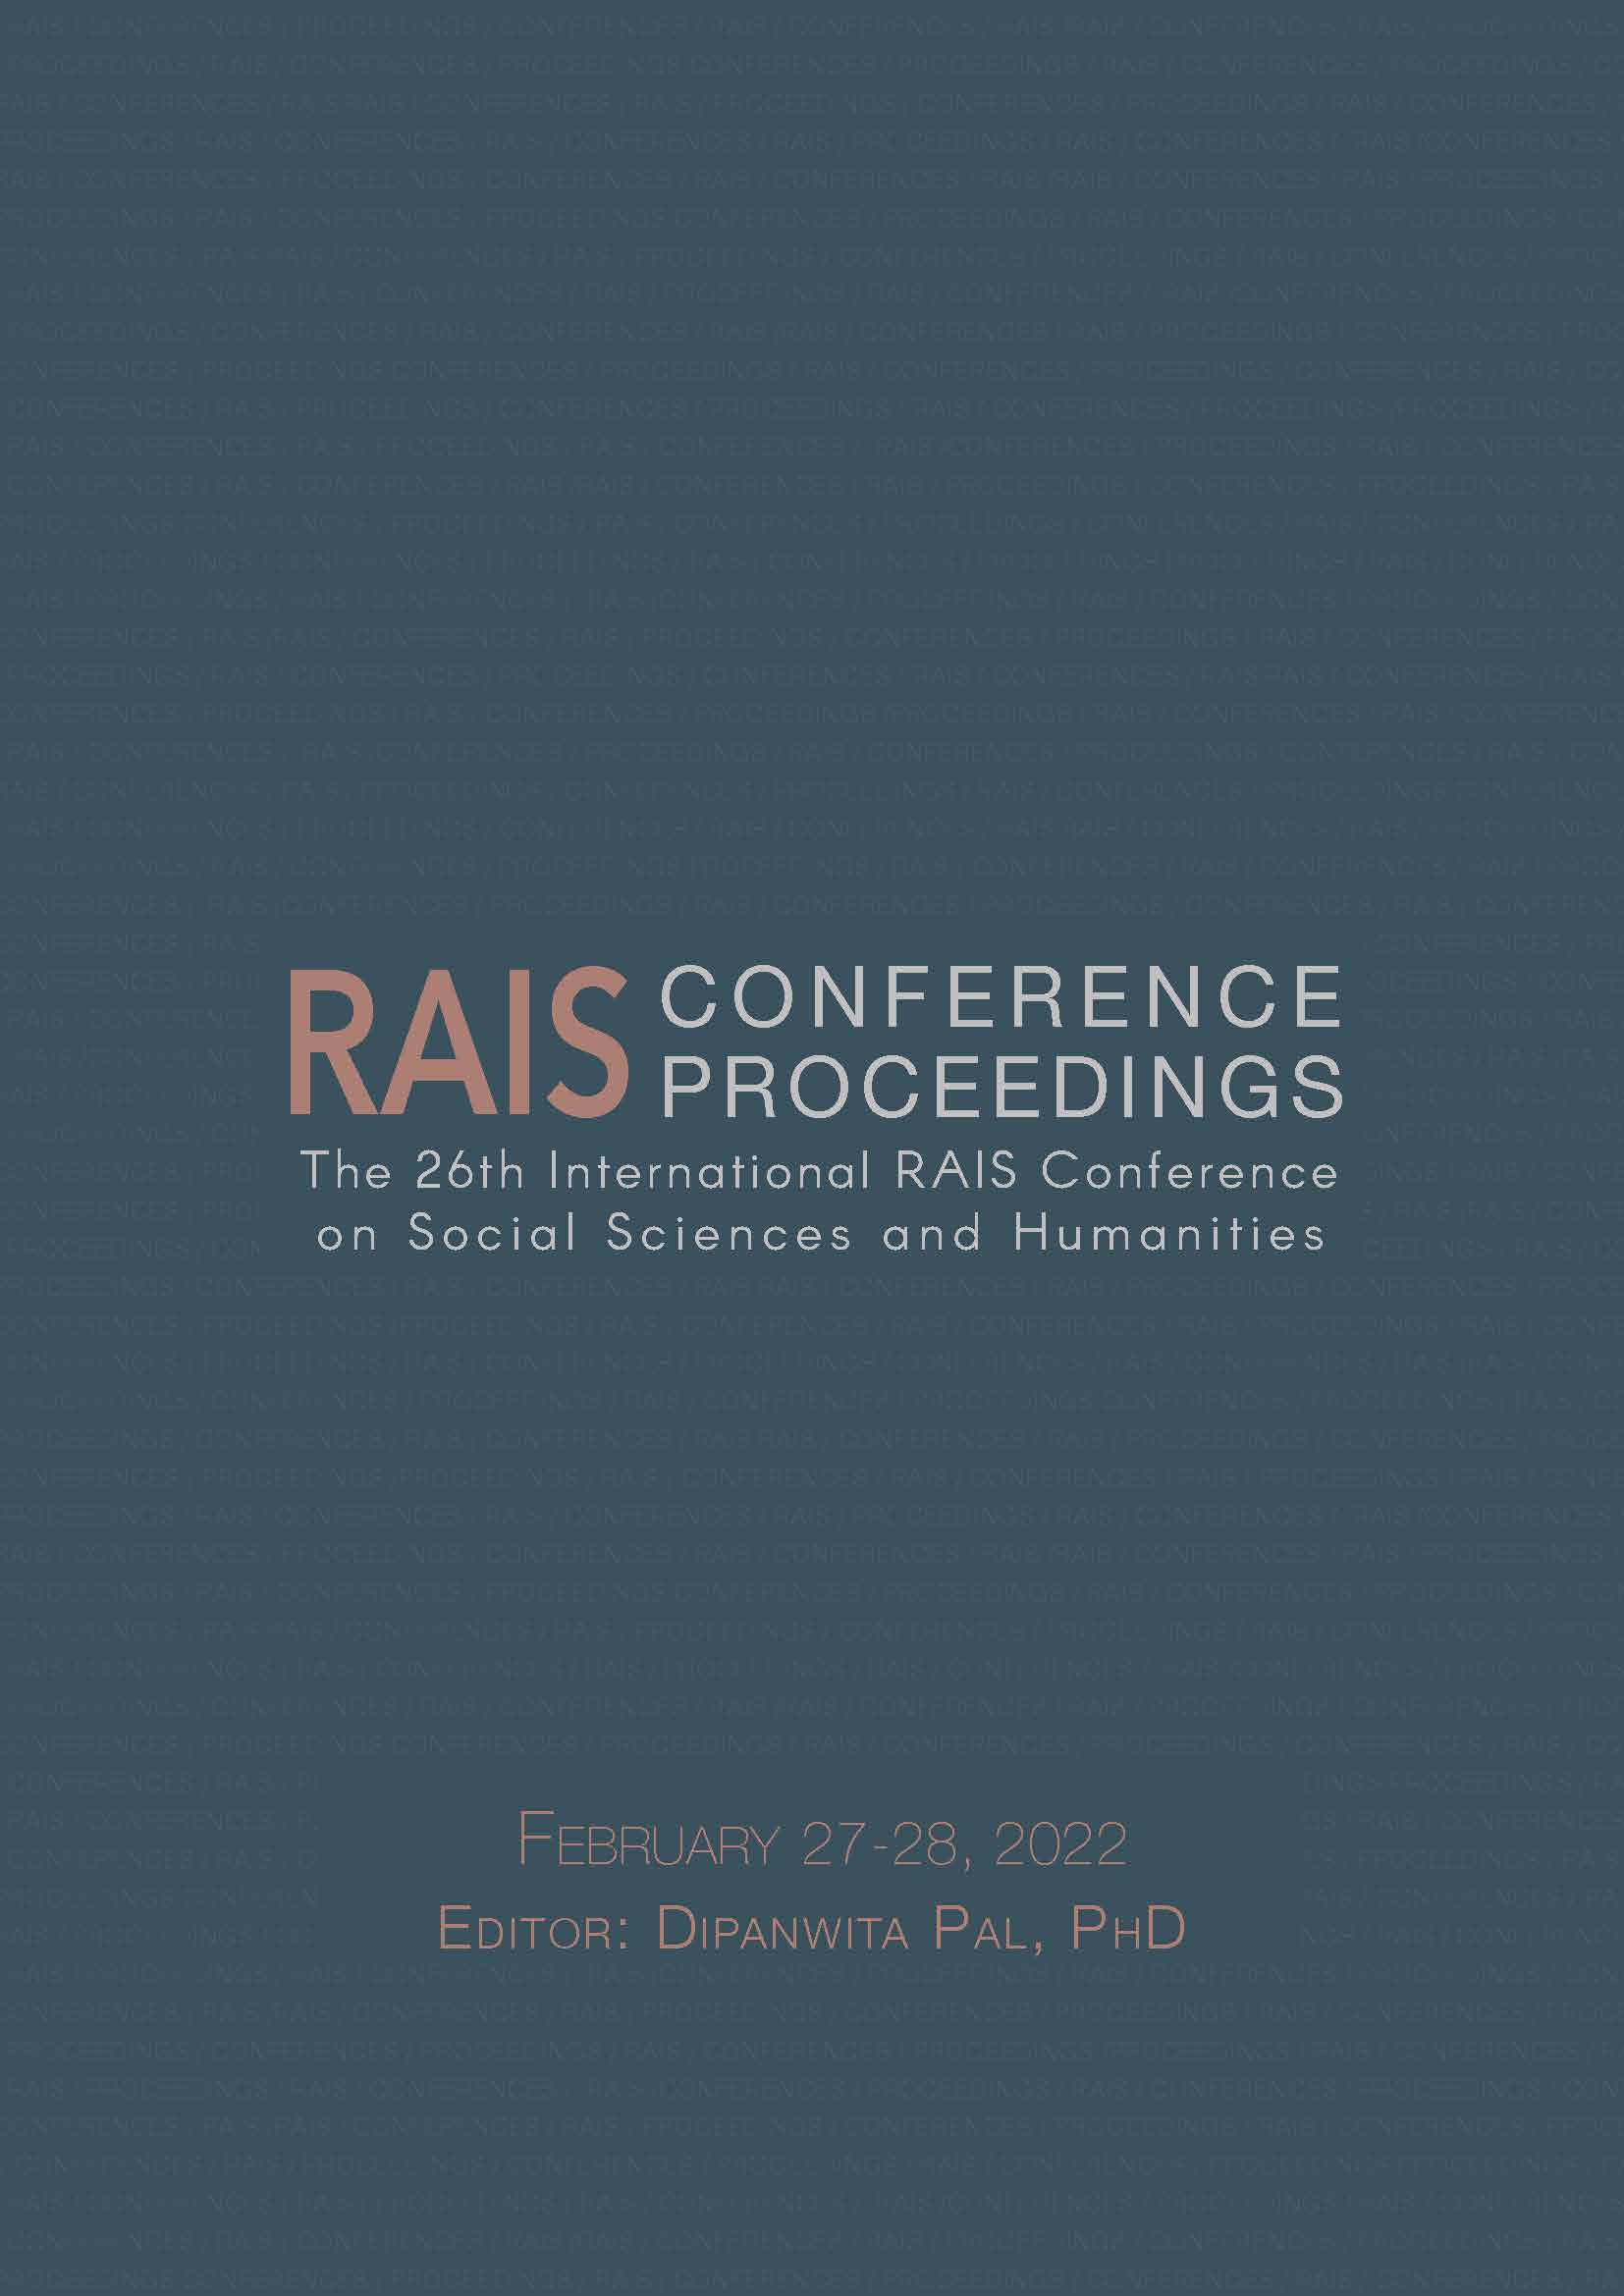 Proceedings of the 26th International RAIS Conference on Social Sciences and Humanities